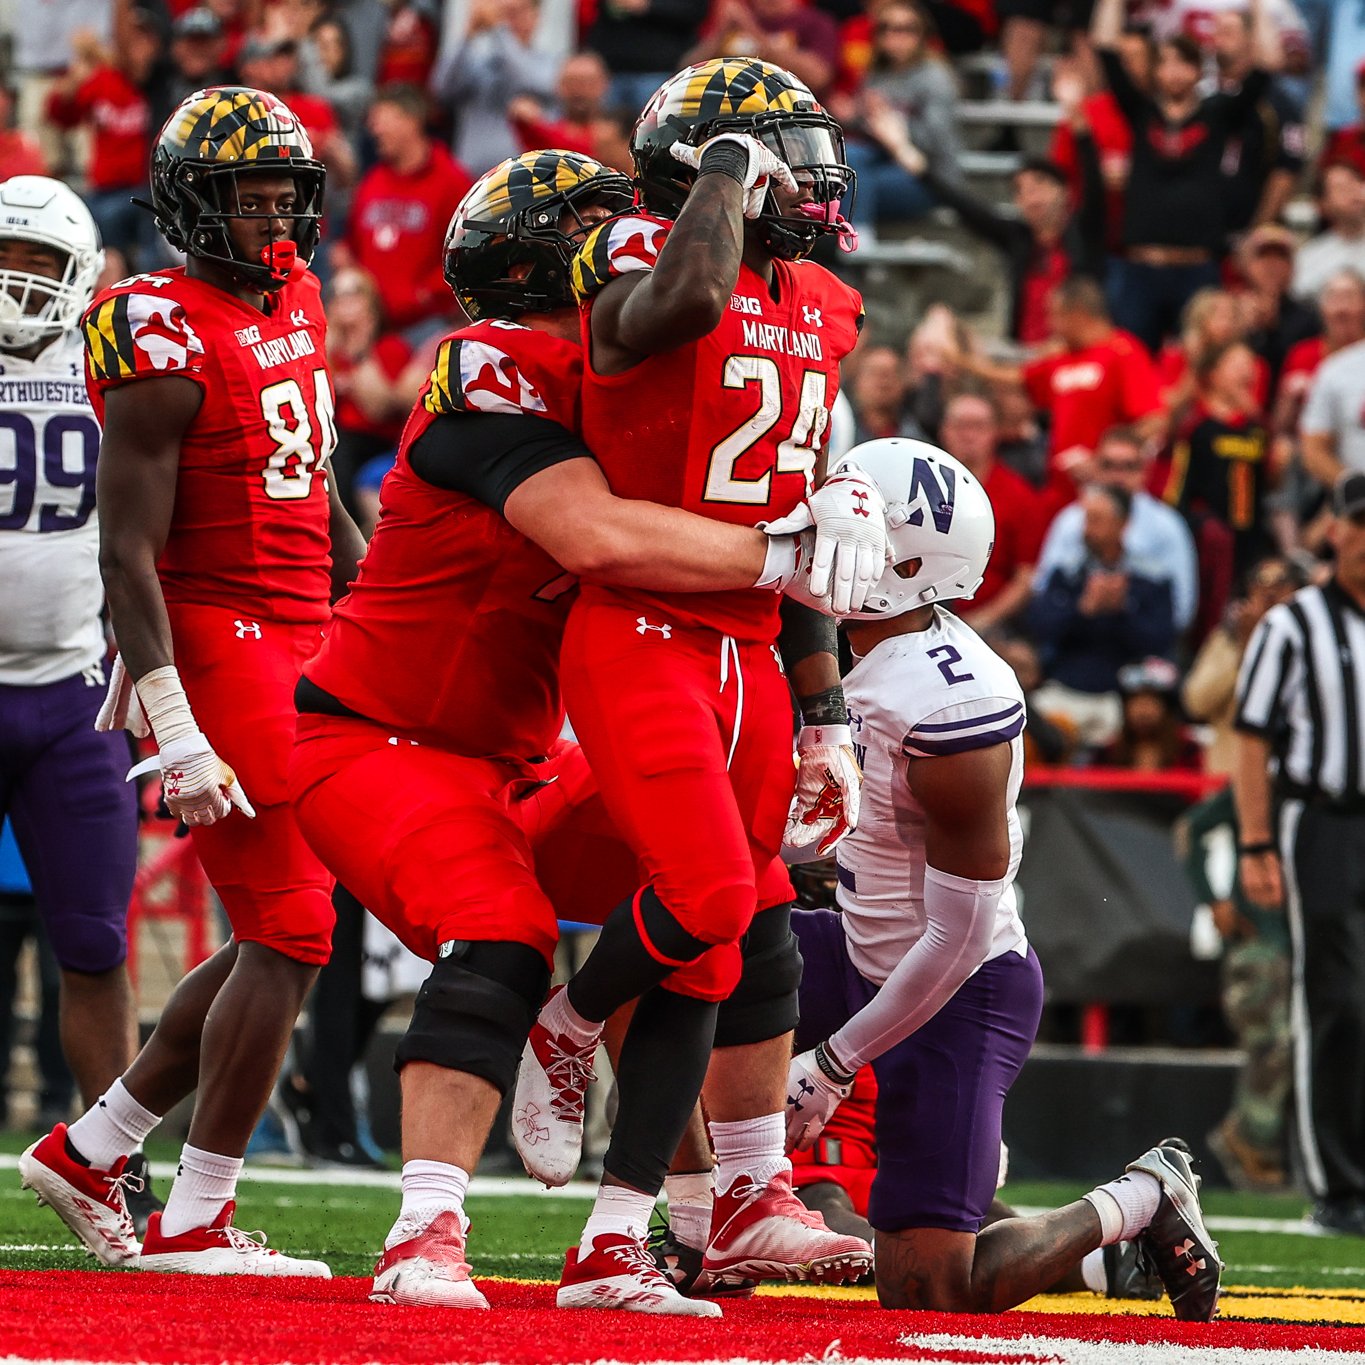 Roman Hemby has a big day for Maryland football against Northwestern